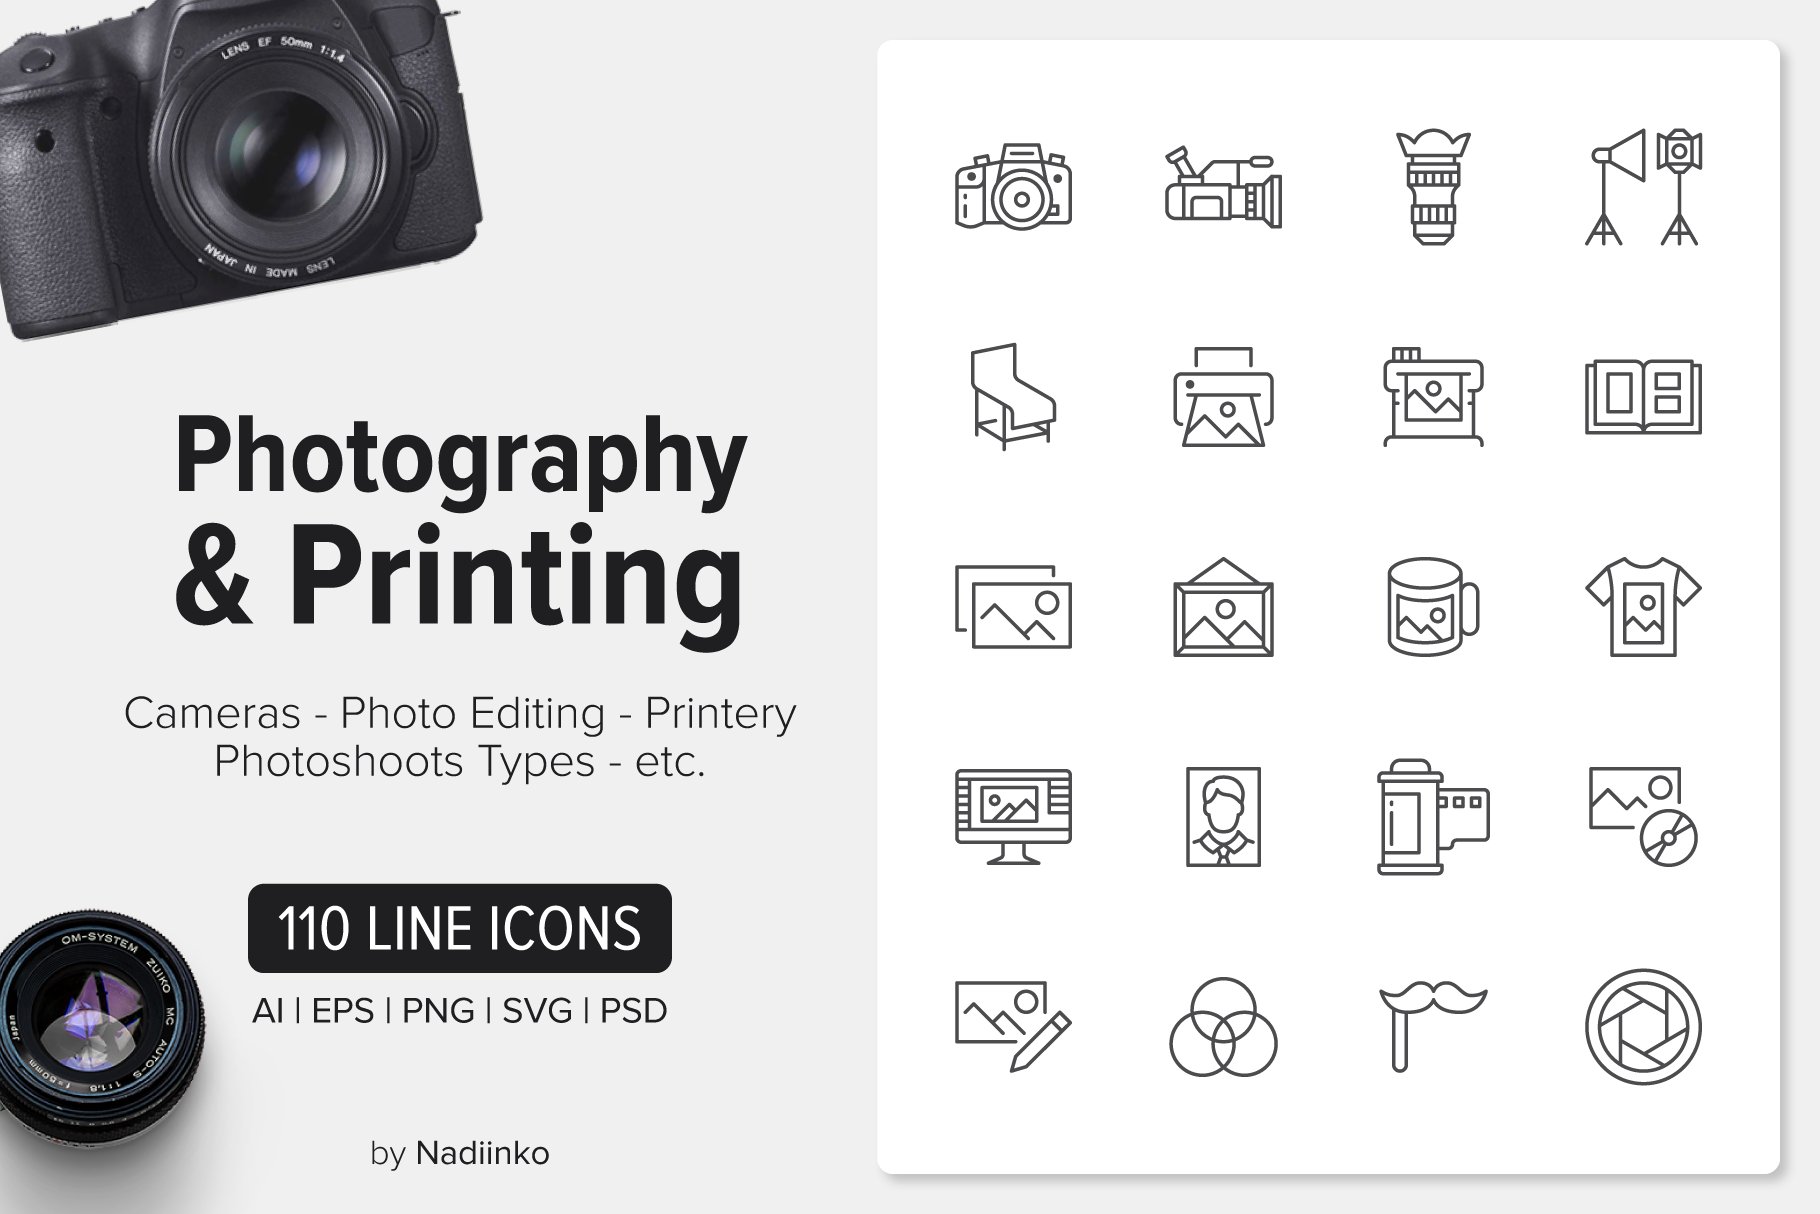 110 Photography Icons cover image.